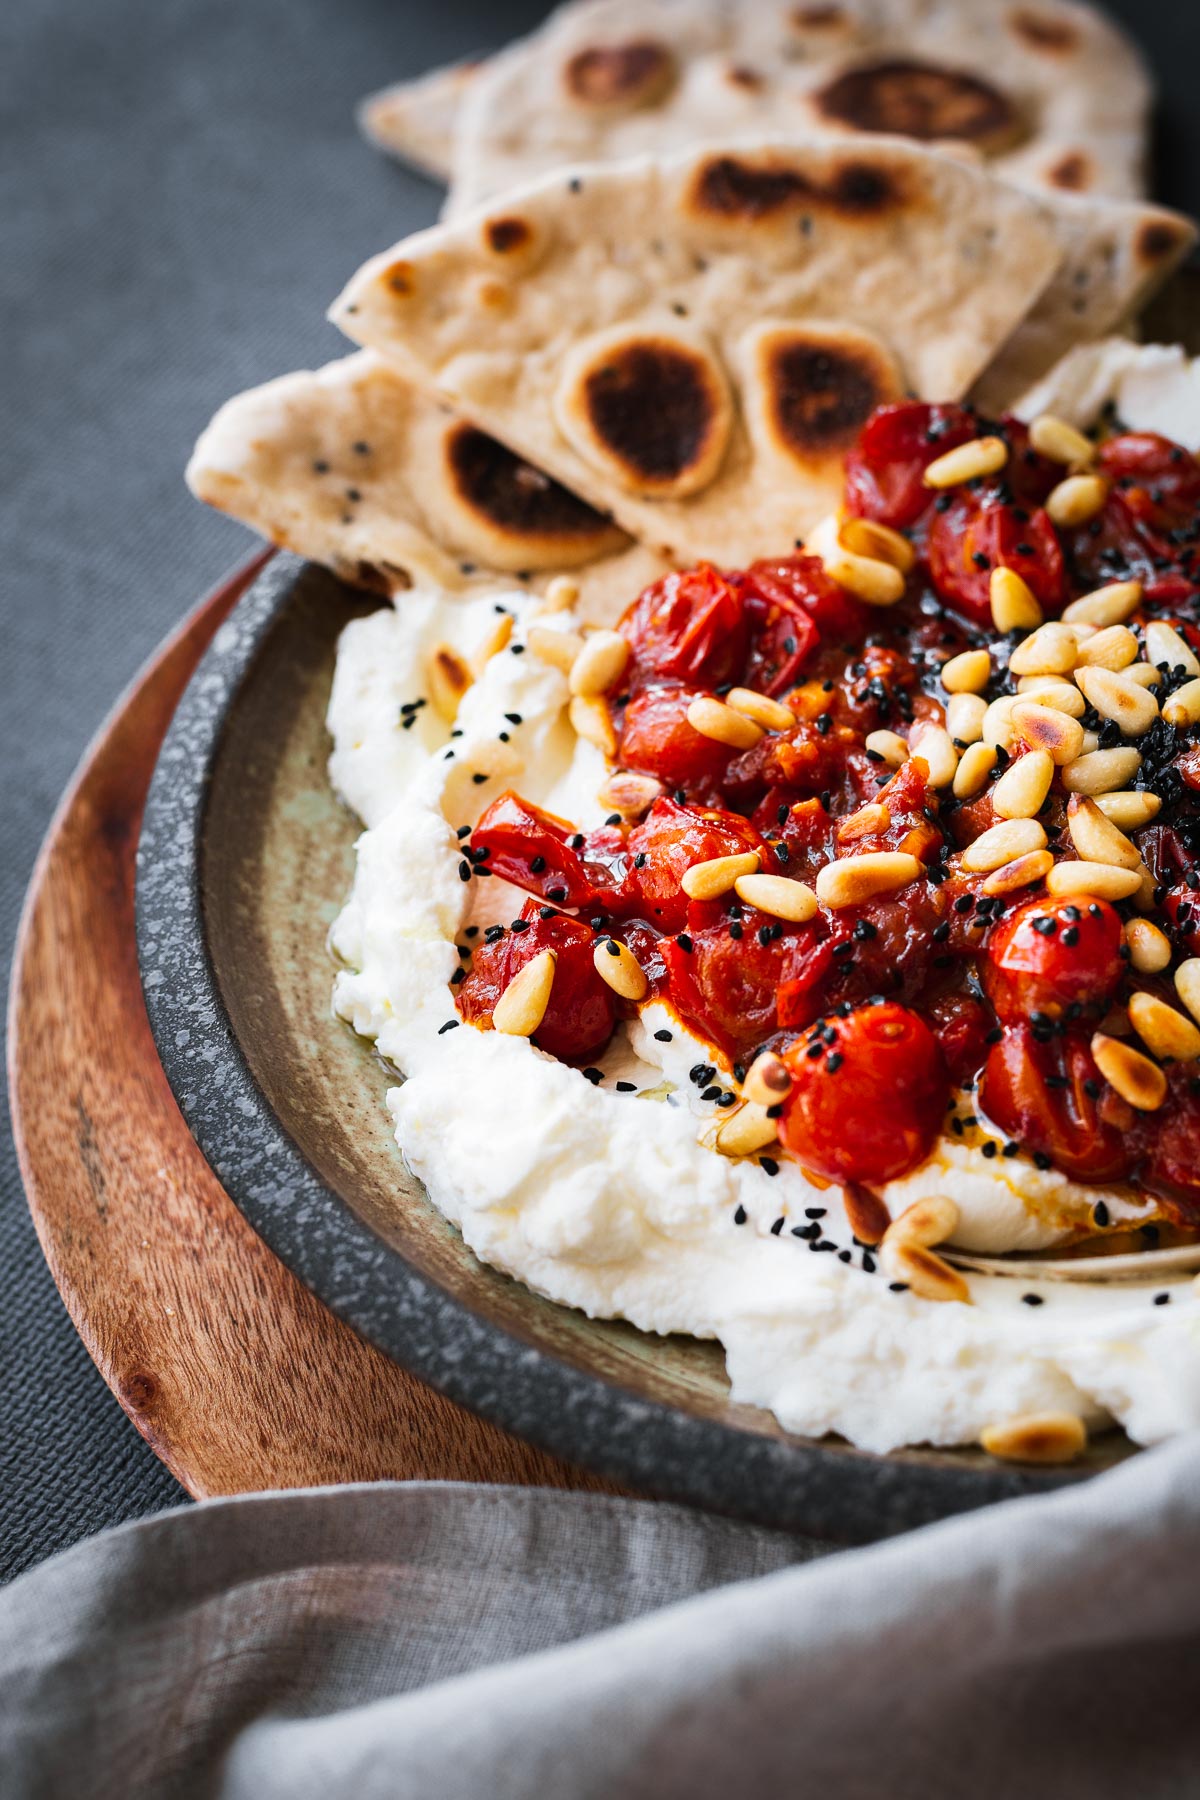 Homemade labneh dip with quick harissa tomato sauce as an appetiser.